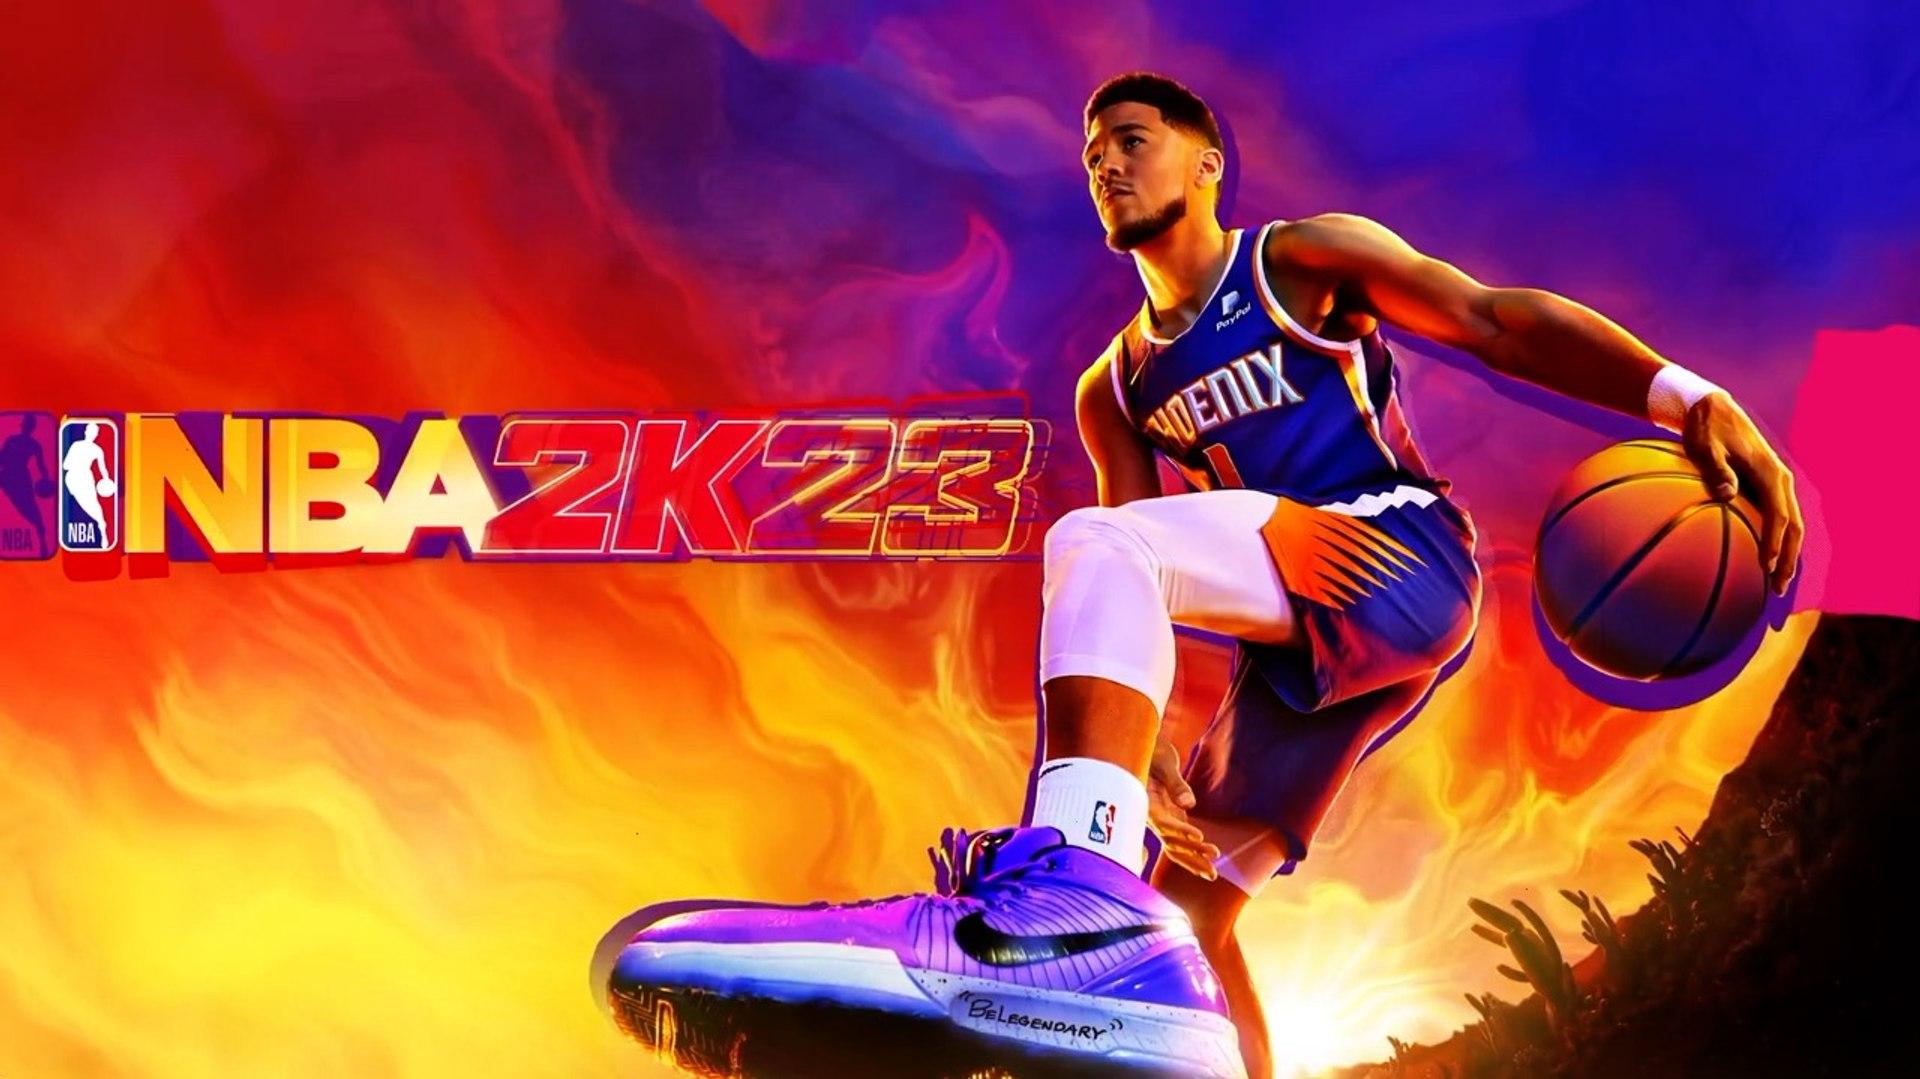 Nba 2k23 Official Anthem Launch Trailer Video Dailymotion